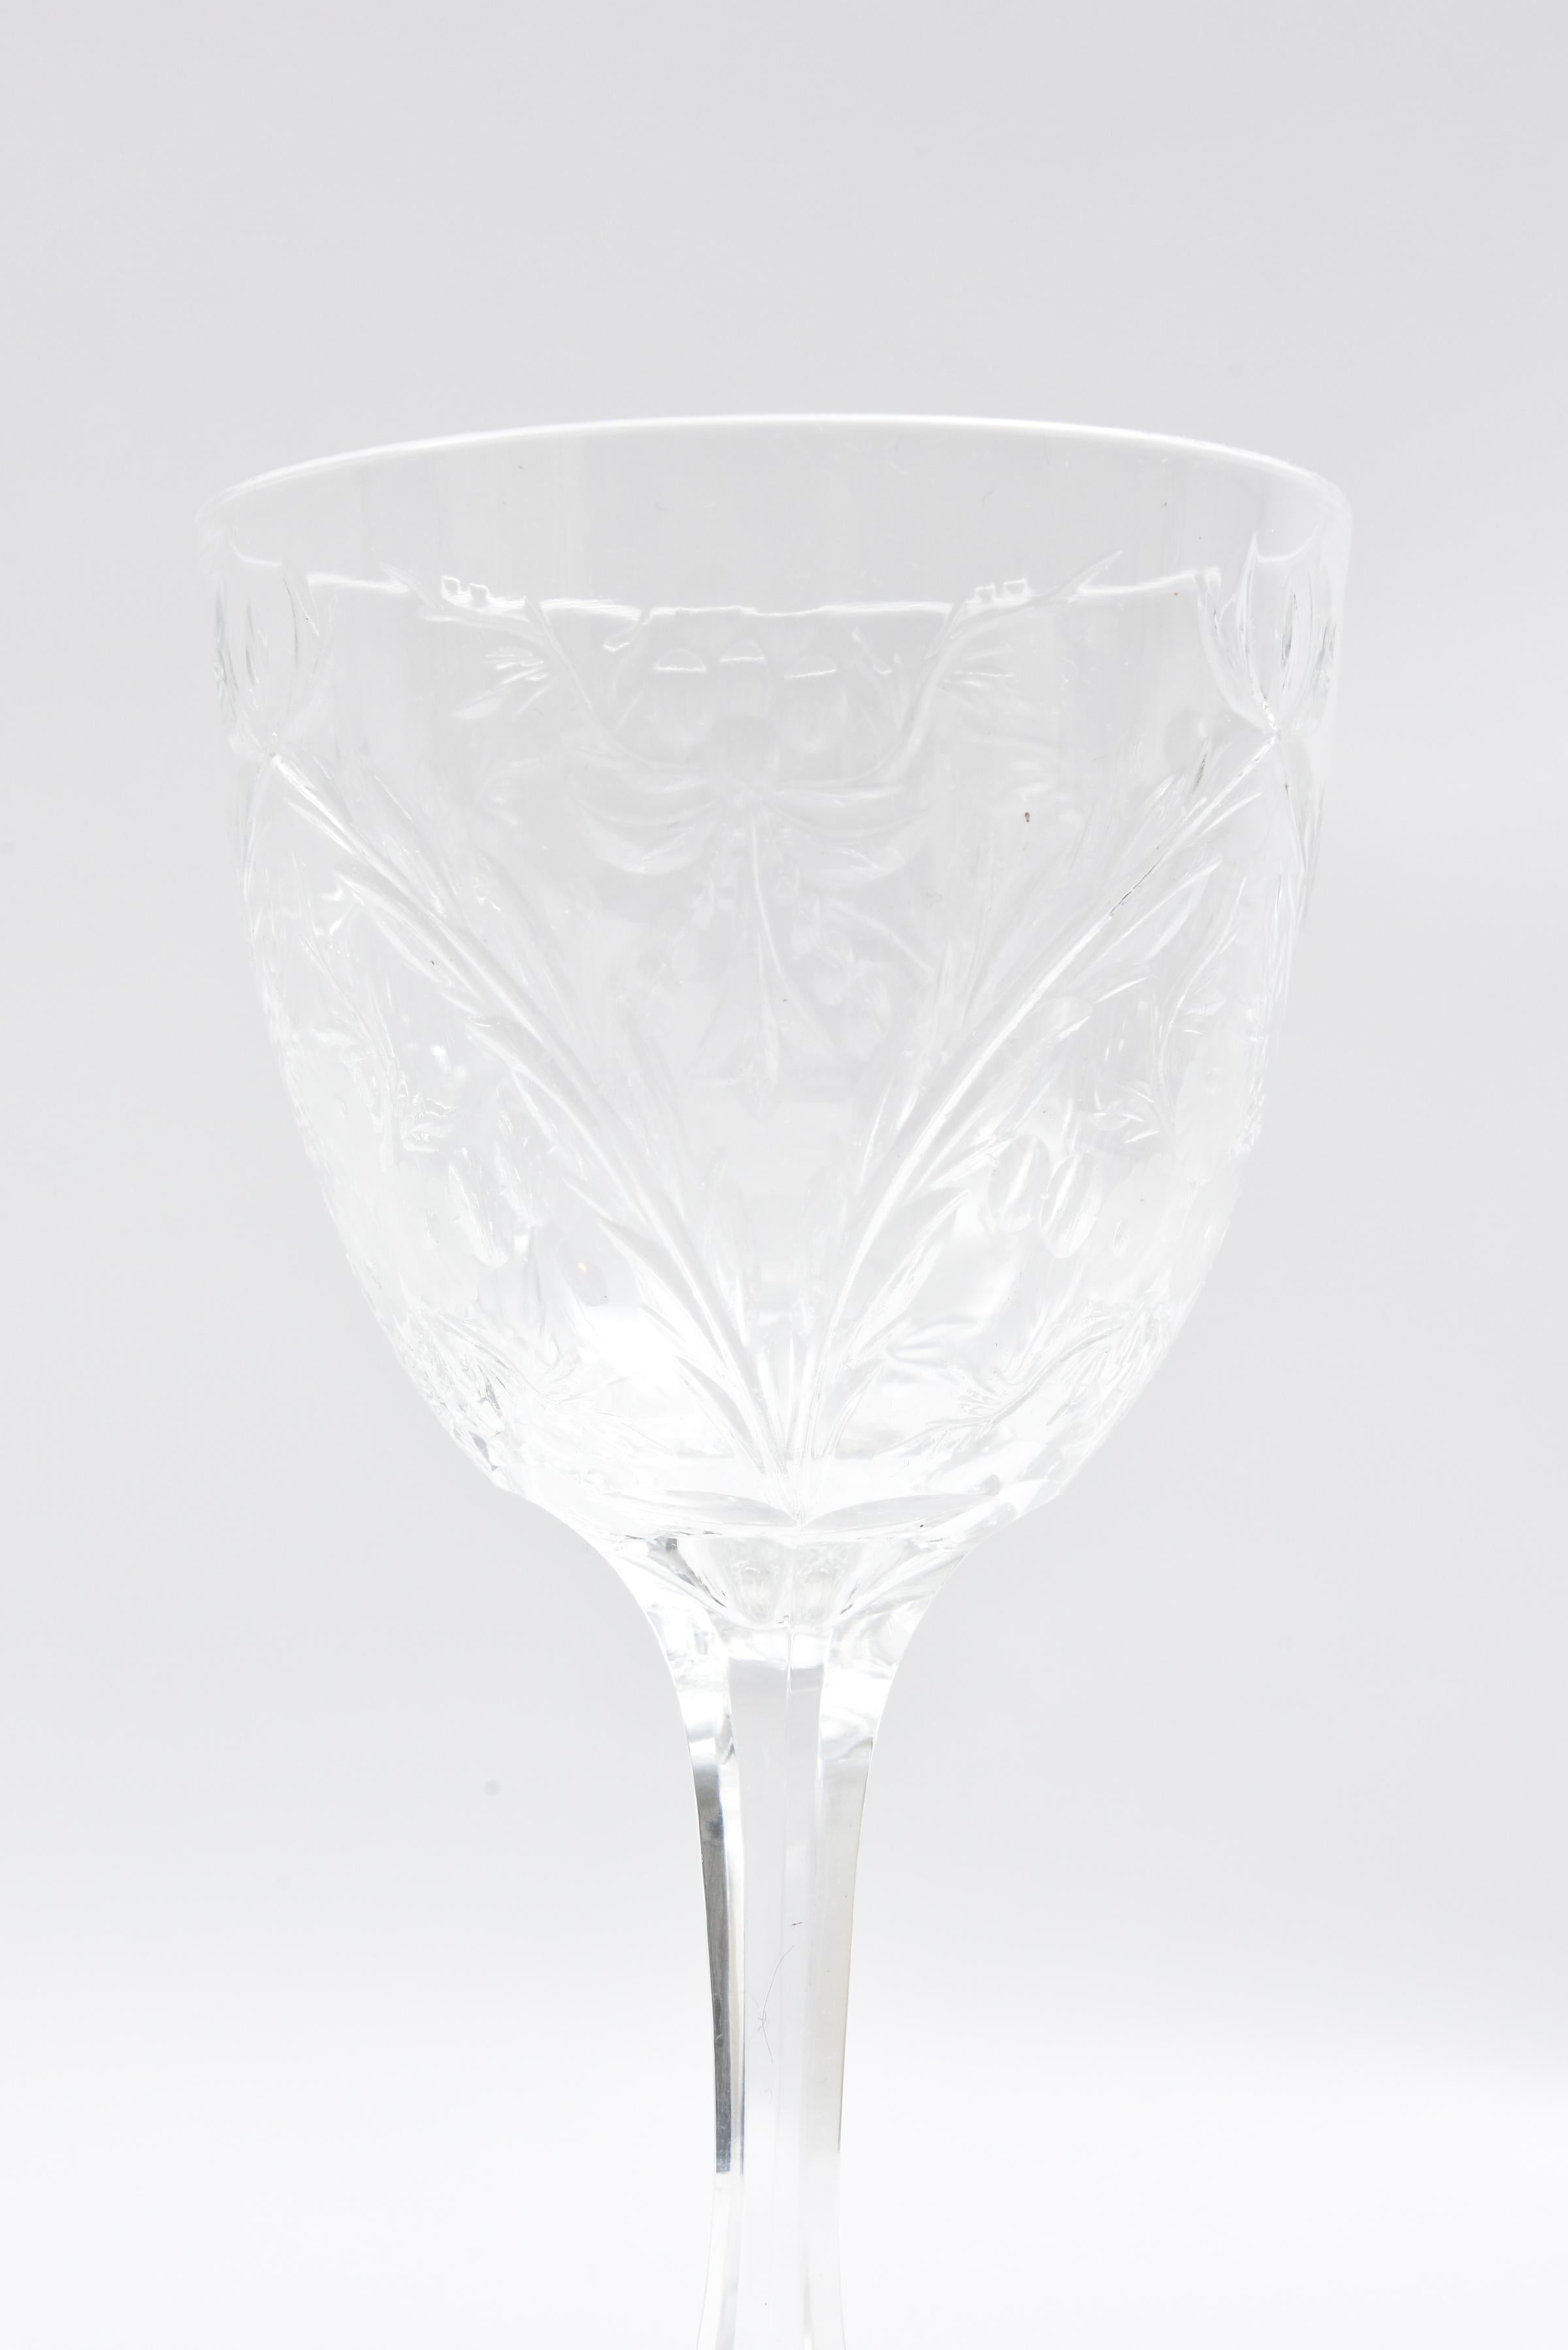 Mid-20th Century Ten Antique English Wine Glasses with Fully Cut Stem and Intaglio Floral Design